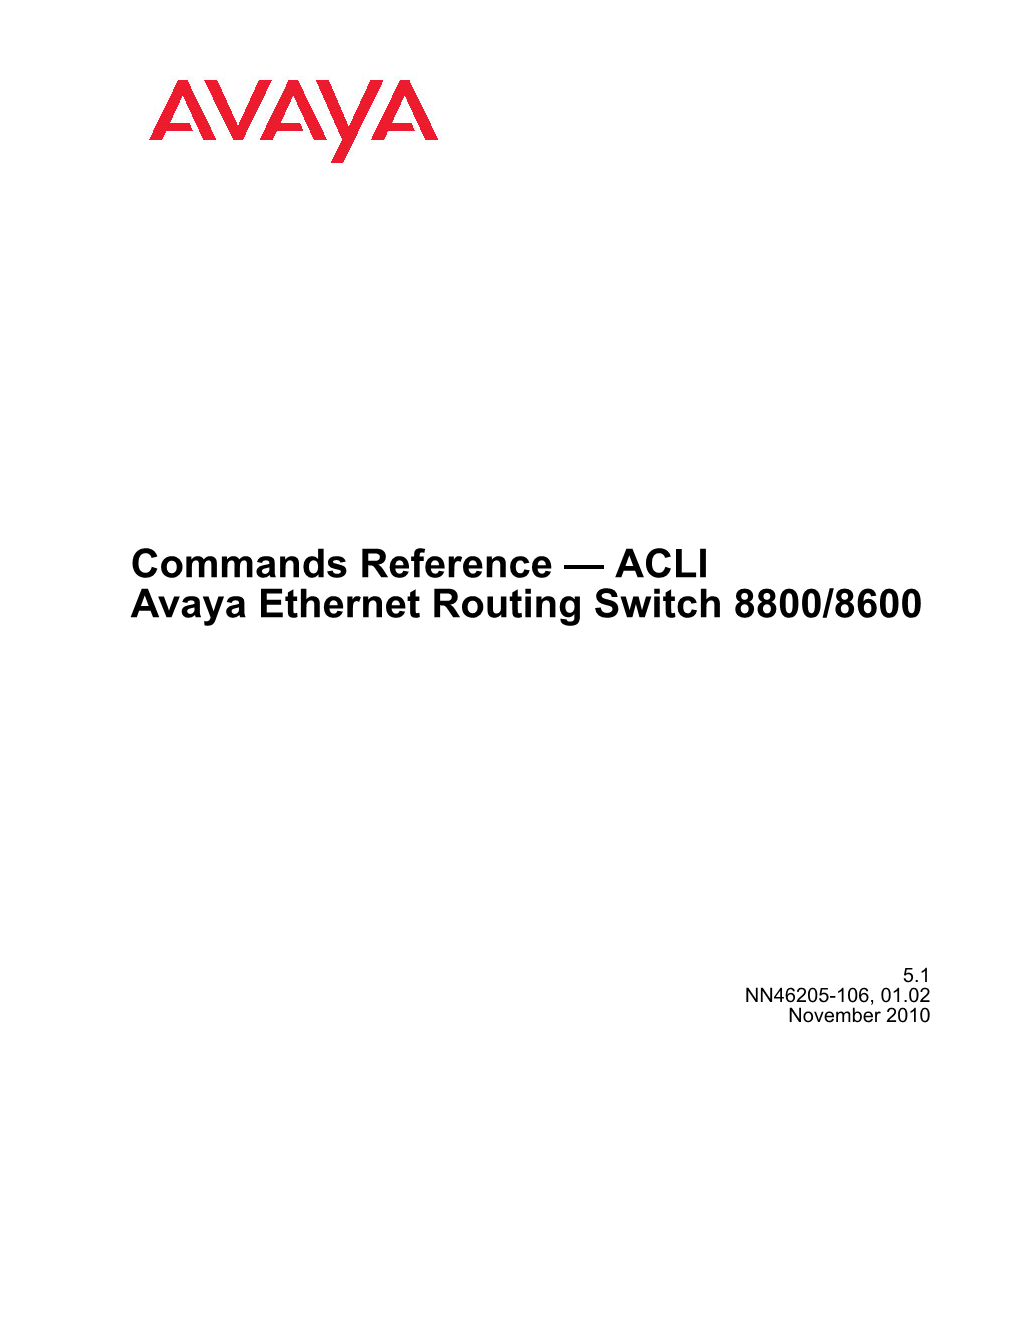 Commands Reference — ACLI Avaya Ethernet Routing Switch 8800/8600